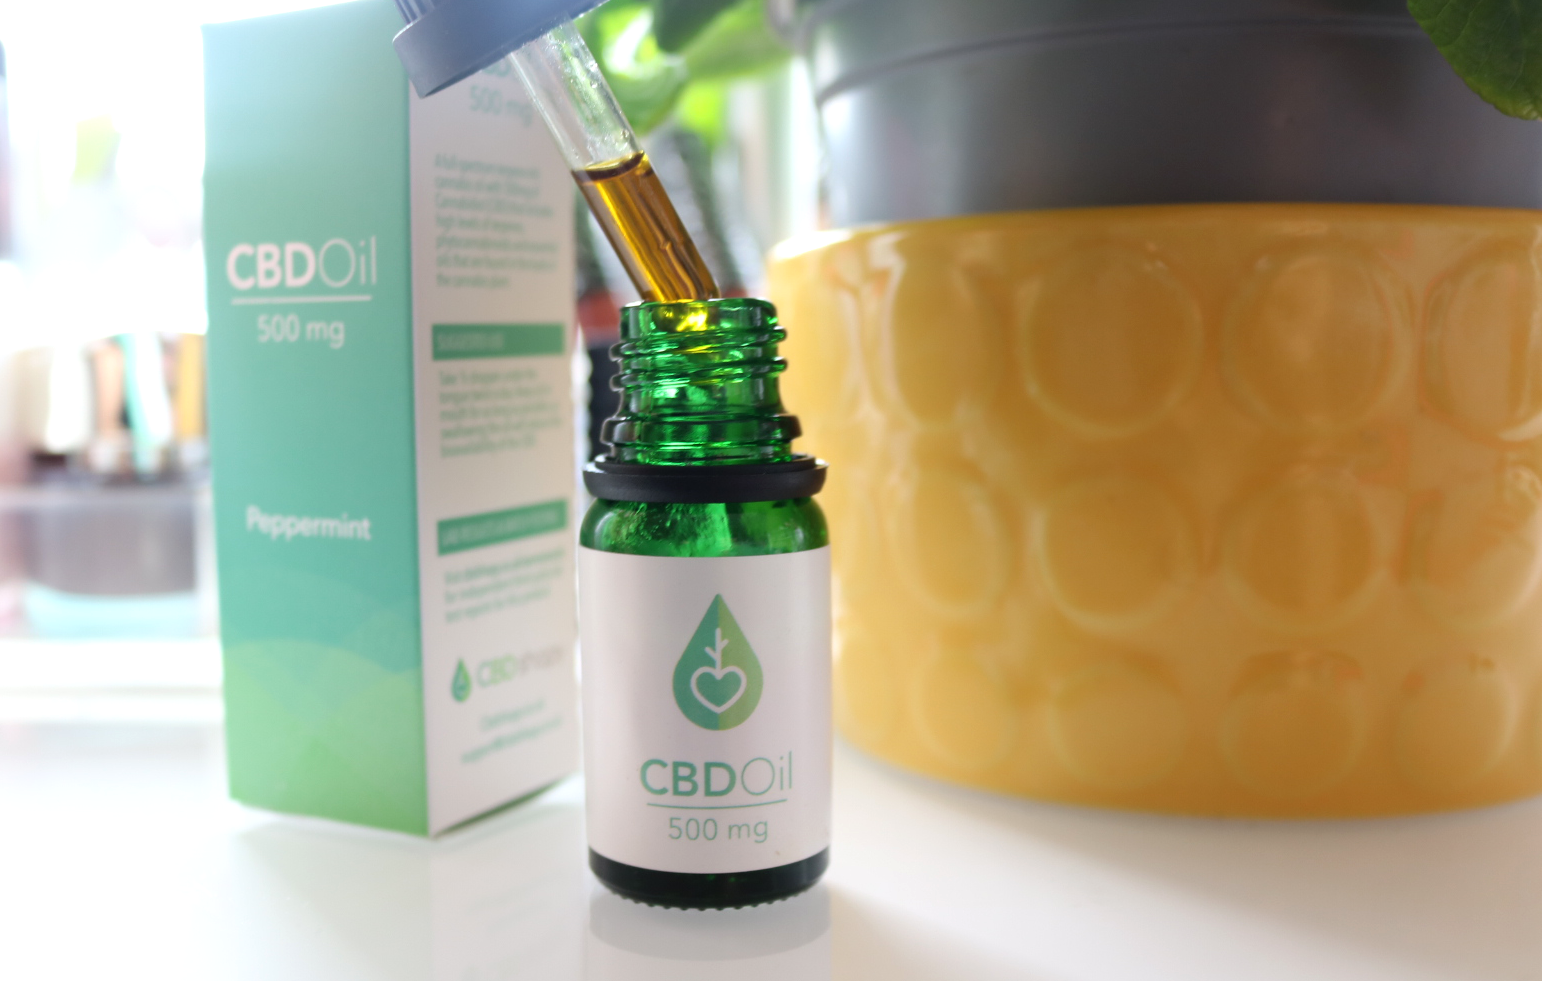 CBDshopy CBD Oil Peppermint review for Mild Anxiety & Natural Pain Relief